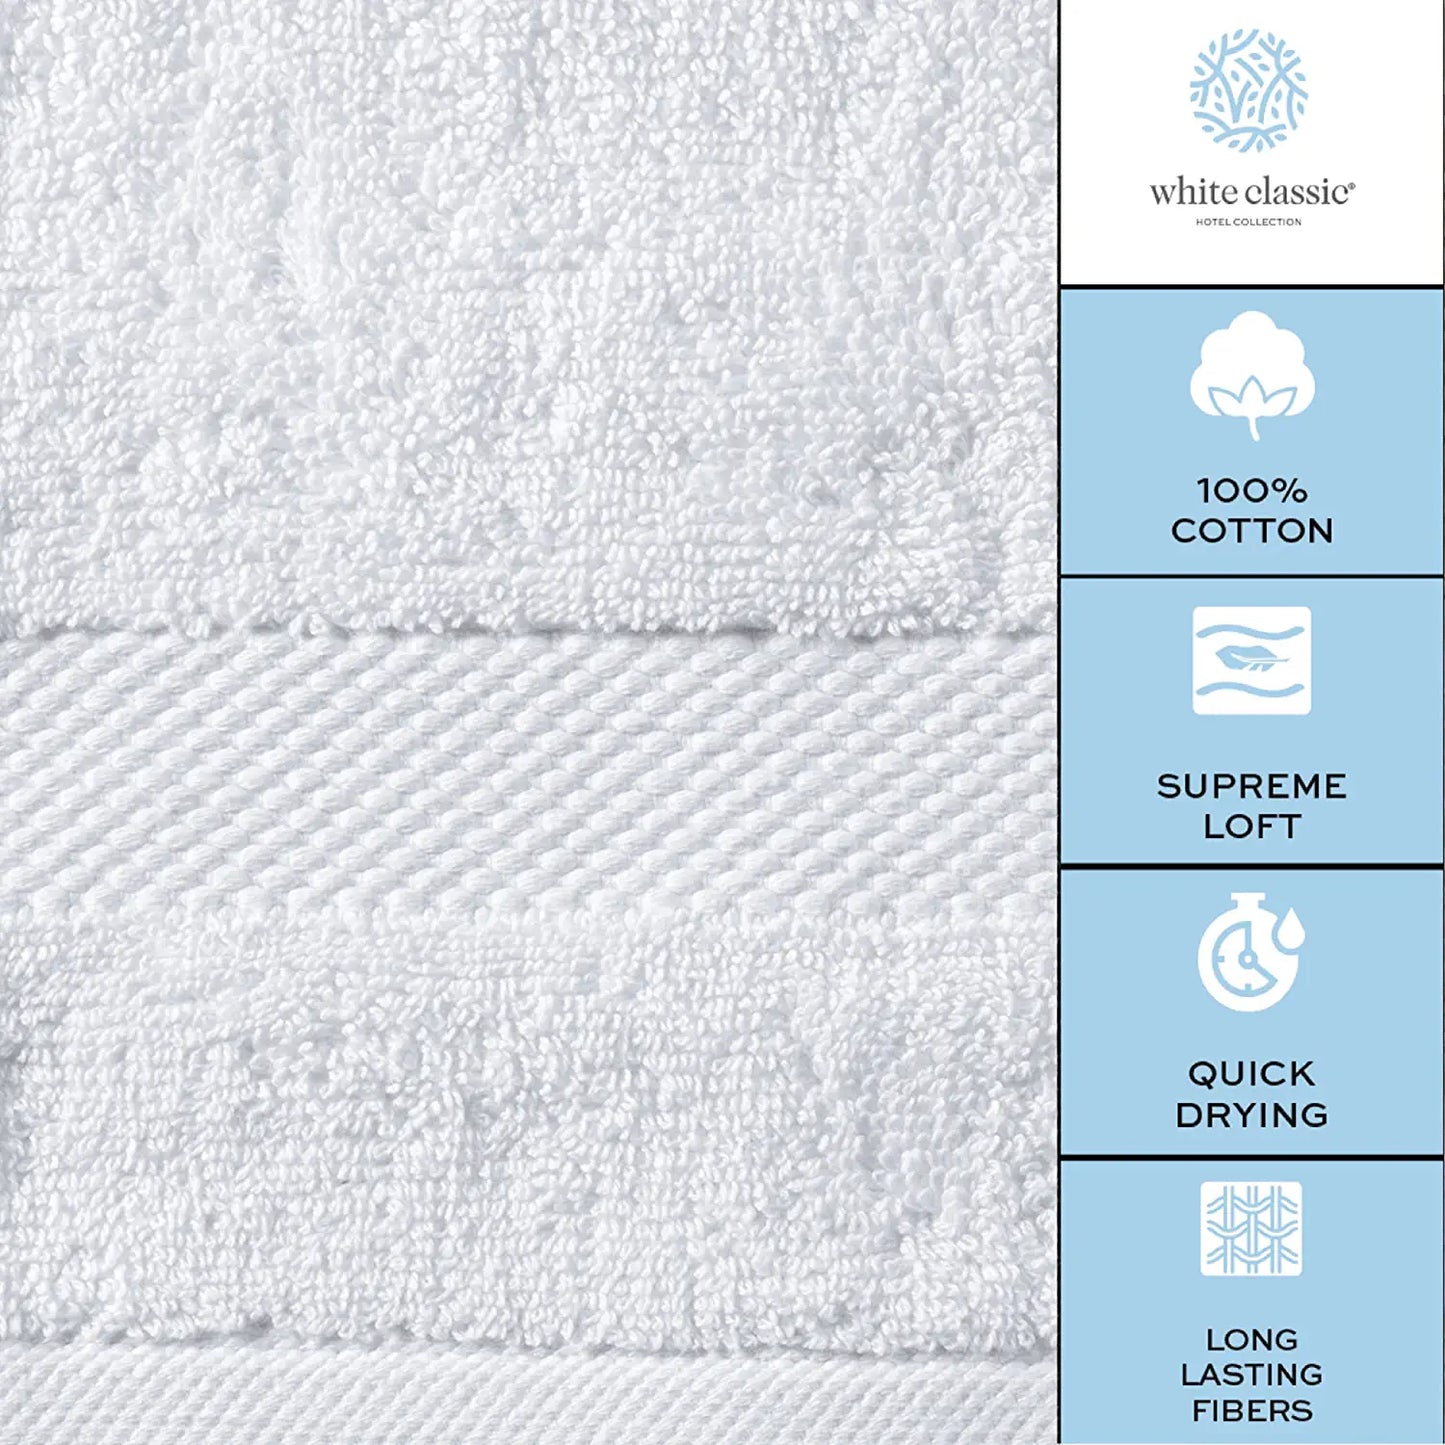 Hotel Collection Luxury Bath Sheets | 35x70 | 2 Pack